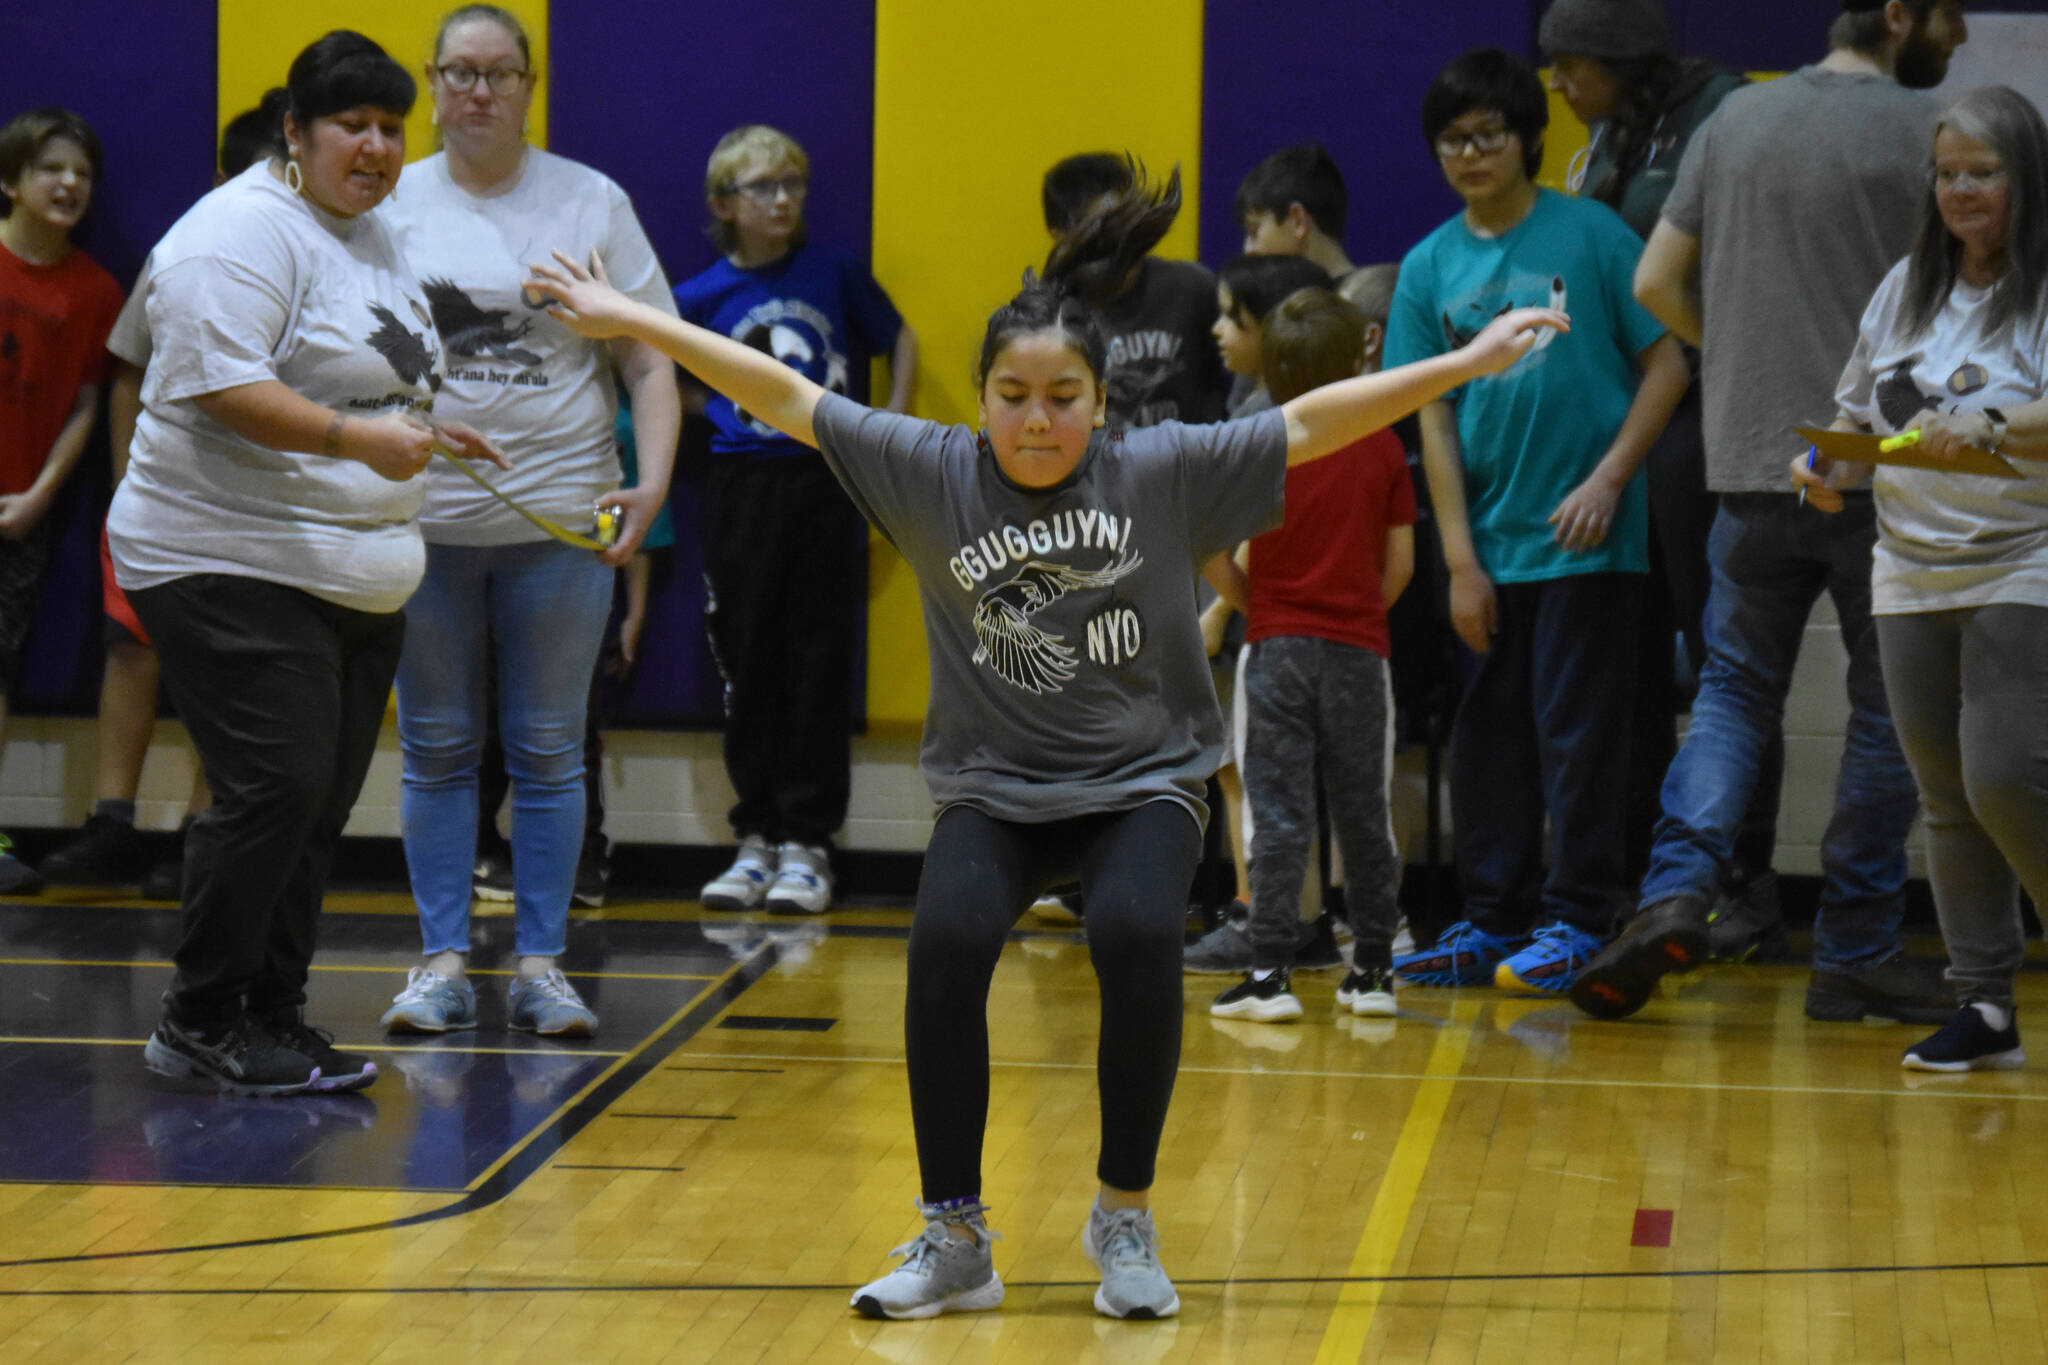 An athlete competing for the Kenaitze Indian Tribe in the Junior division sticks her landing while performing the scissor broad jump during the Kahtnuht’ana Hey Chi’ula NYO Invitational on Frdiay, Jan. 13, 2023, at Kenai Middle School in Kenai, Alaska. (Jake Dye/Peninsula Clarion)